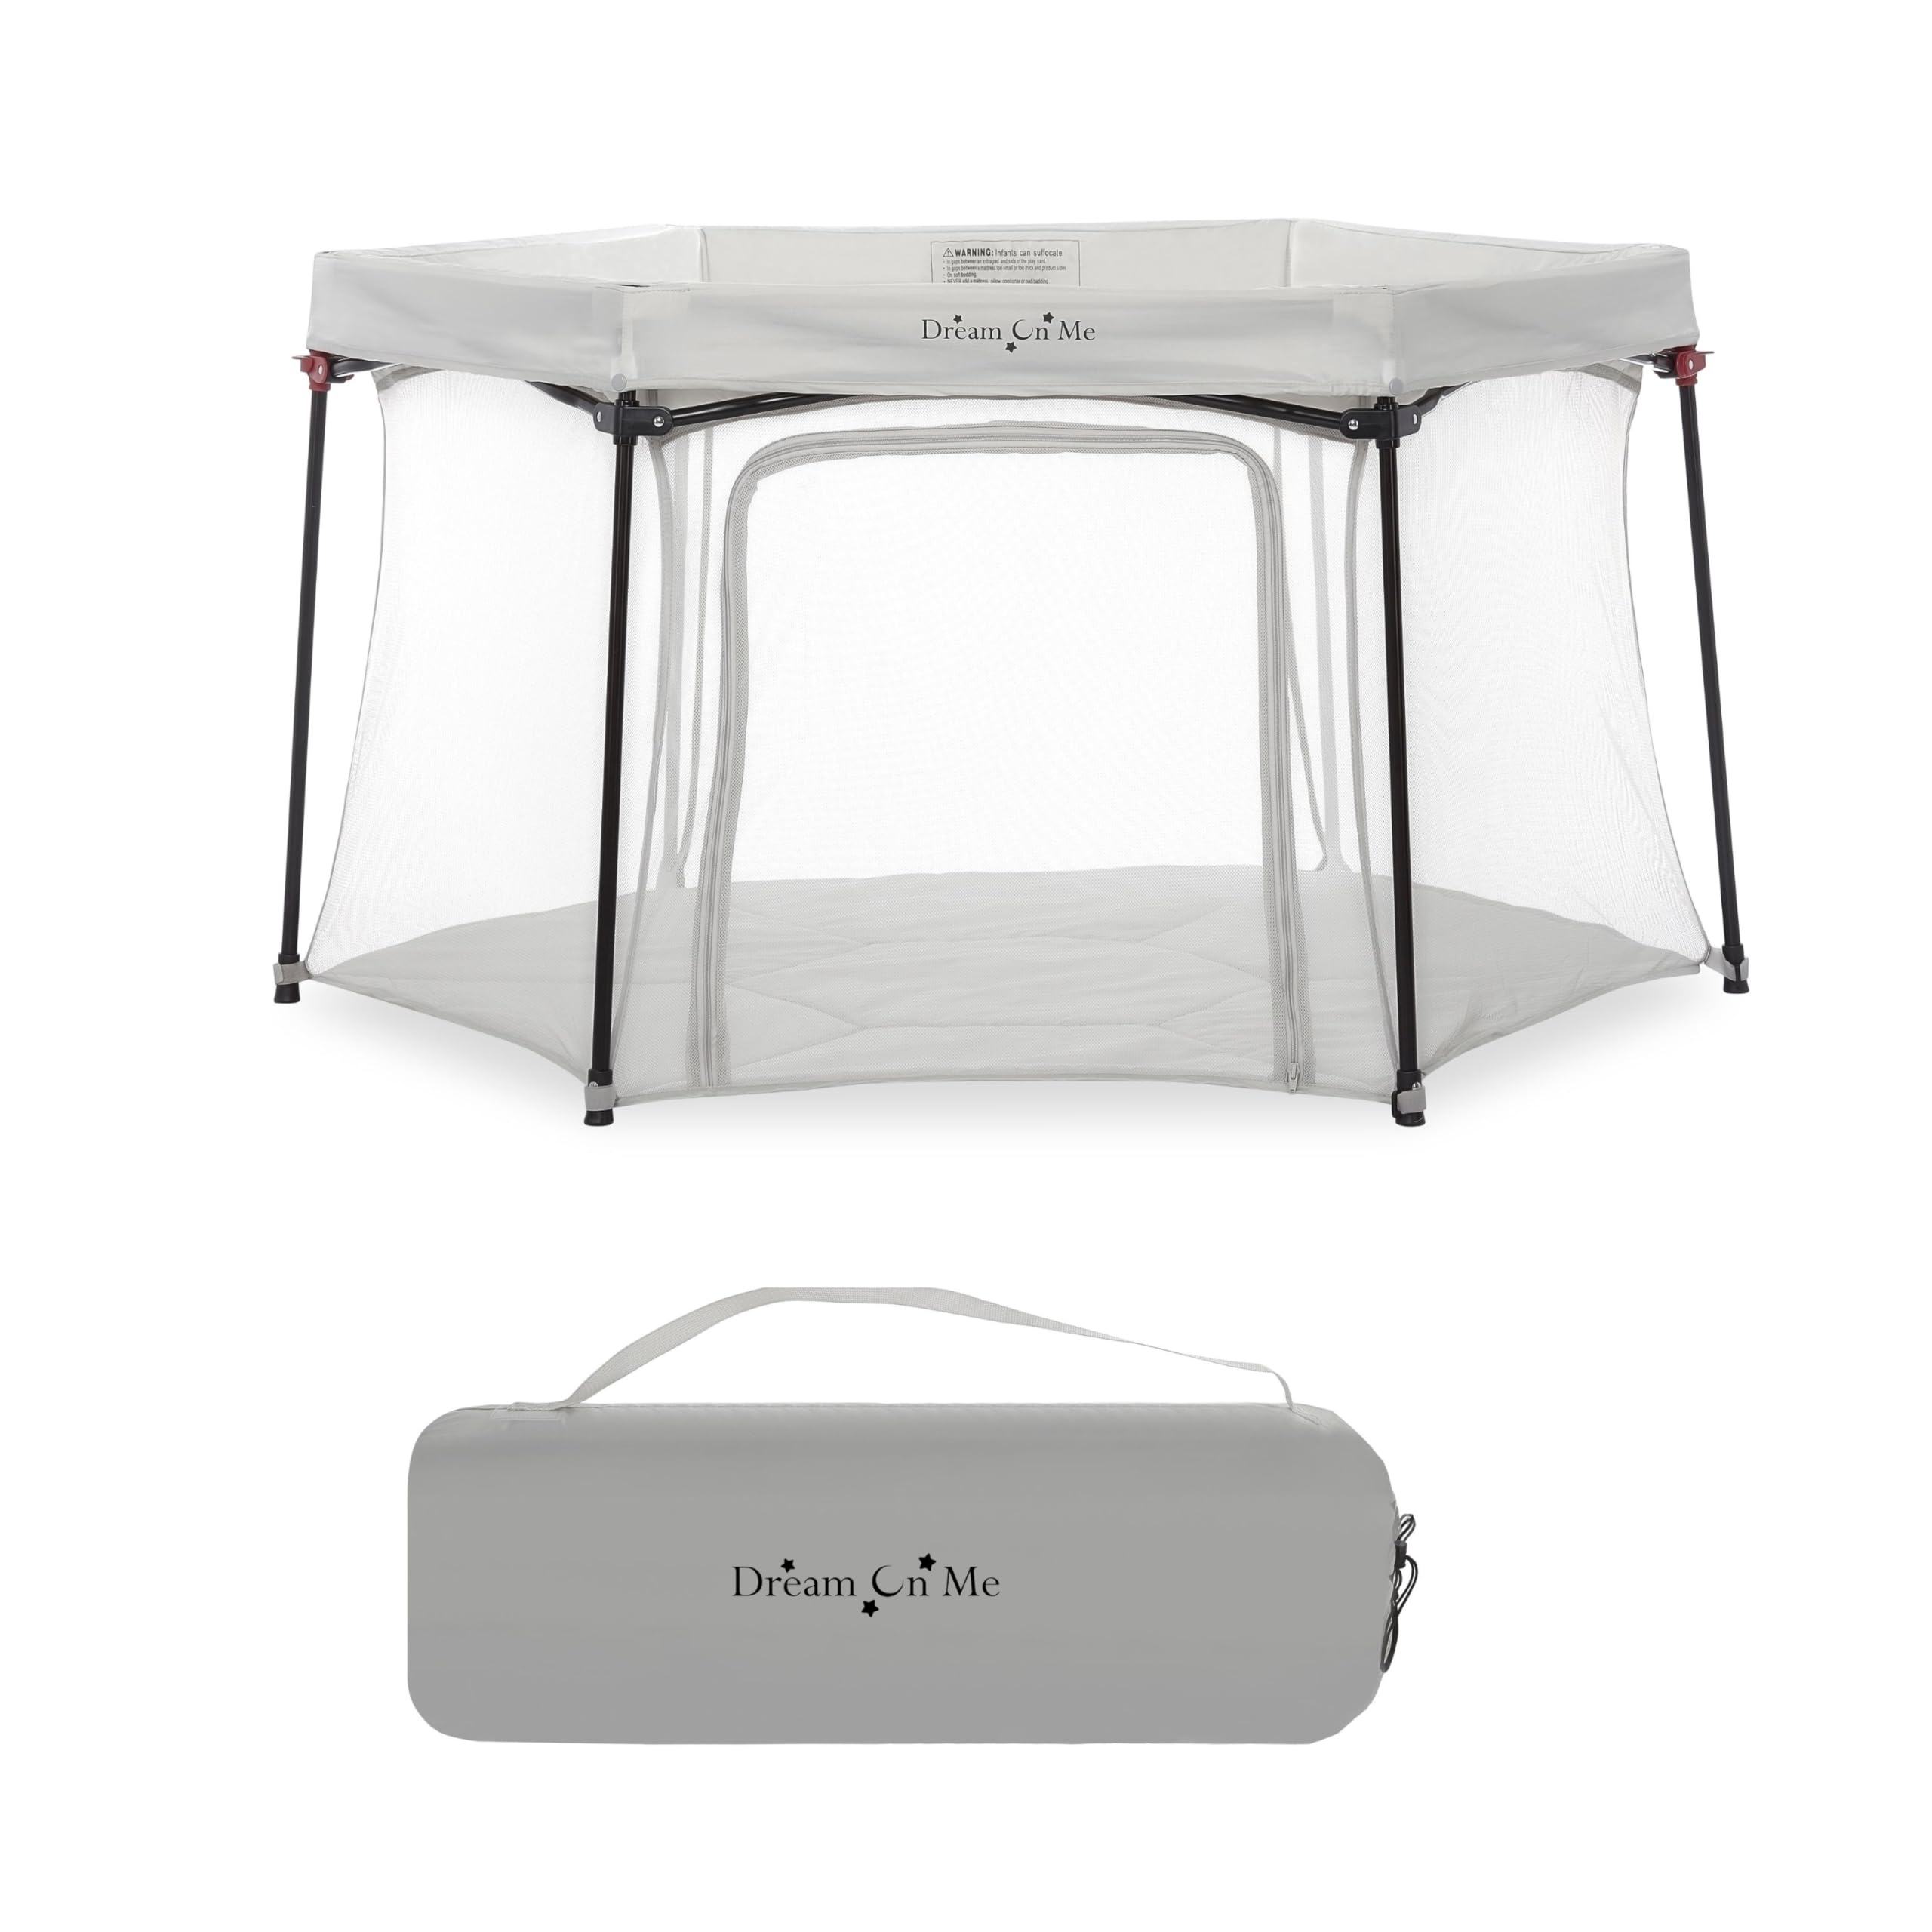 Dream On Me Onyx Playpen in Grey, Baby Playpen, Portable and Lightweight, Playpen for Babies and Toddler - Comes with a Comfortable Padded Floor